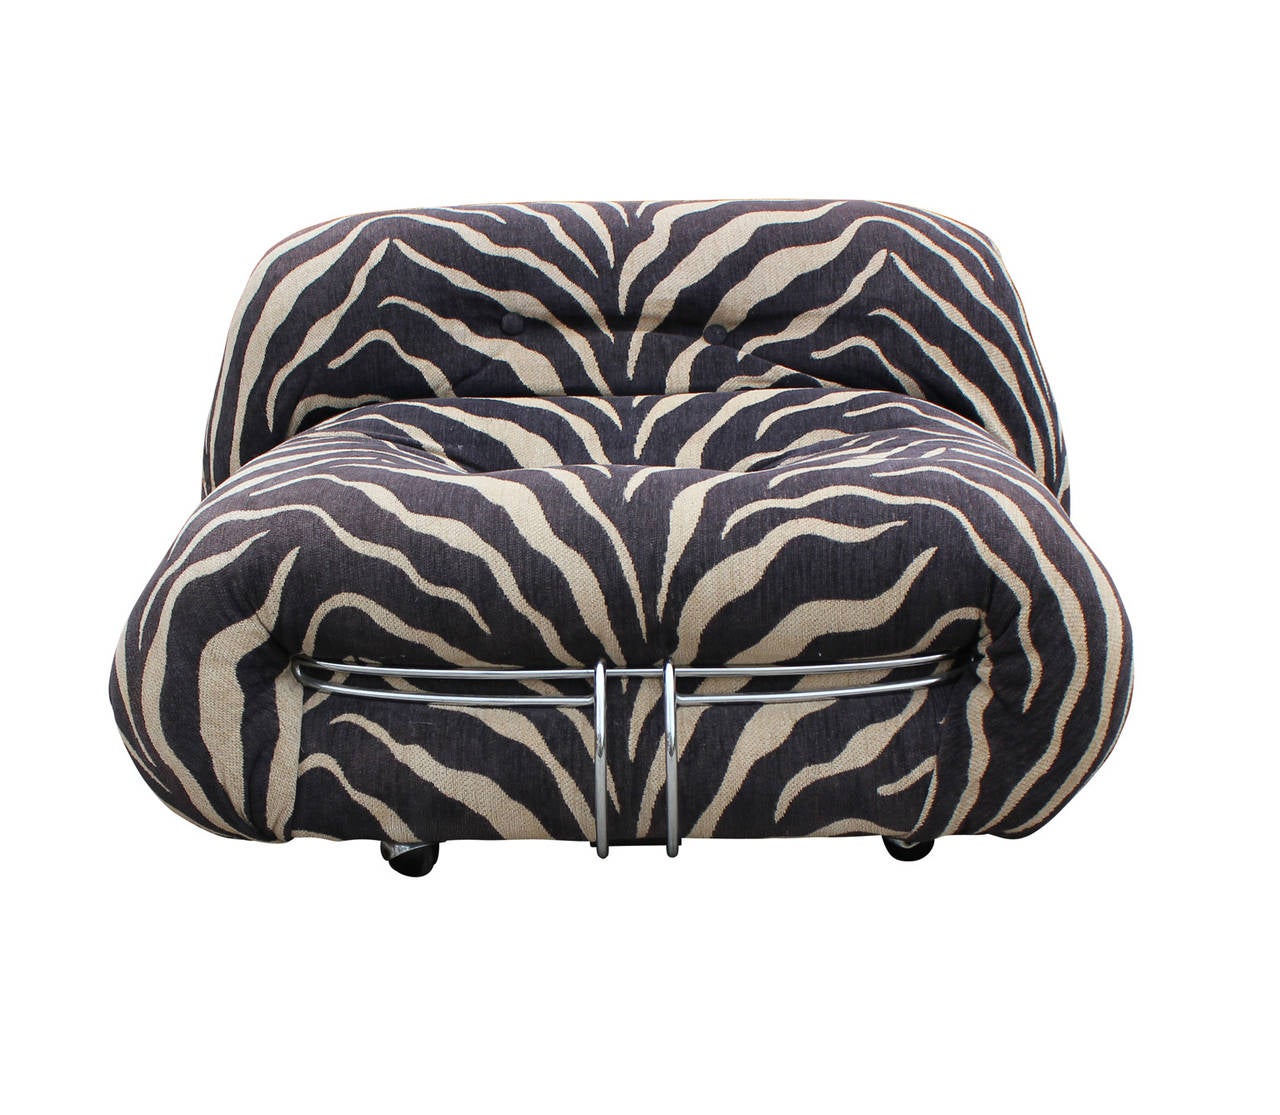 Beautiful sculptural, pleated lounge chairs designed by Tobia Scarpa for Casina.   Pleated and gathered fabric is contrasted with chrome accents. Chairs are low to the ground perfect for lounging. Currently upholstered in zebra print fabric;